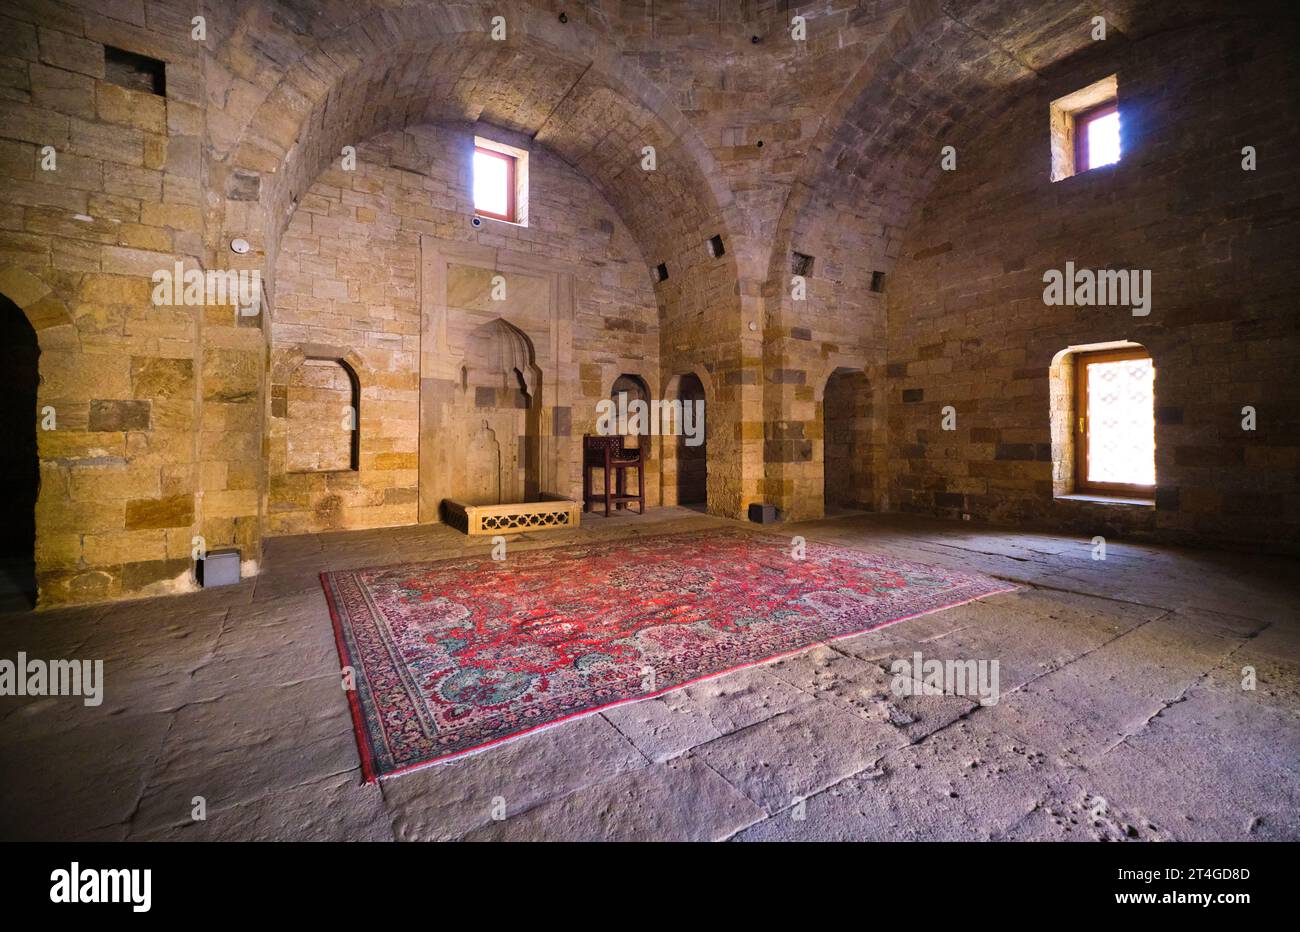 Interior view of the Shah Mosque, Şah Məscidi with red rug, carpet. At the Palace of the Shirvanshahs complex in the Old City section of Baku, Azerbai Stock Photo